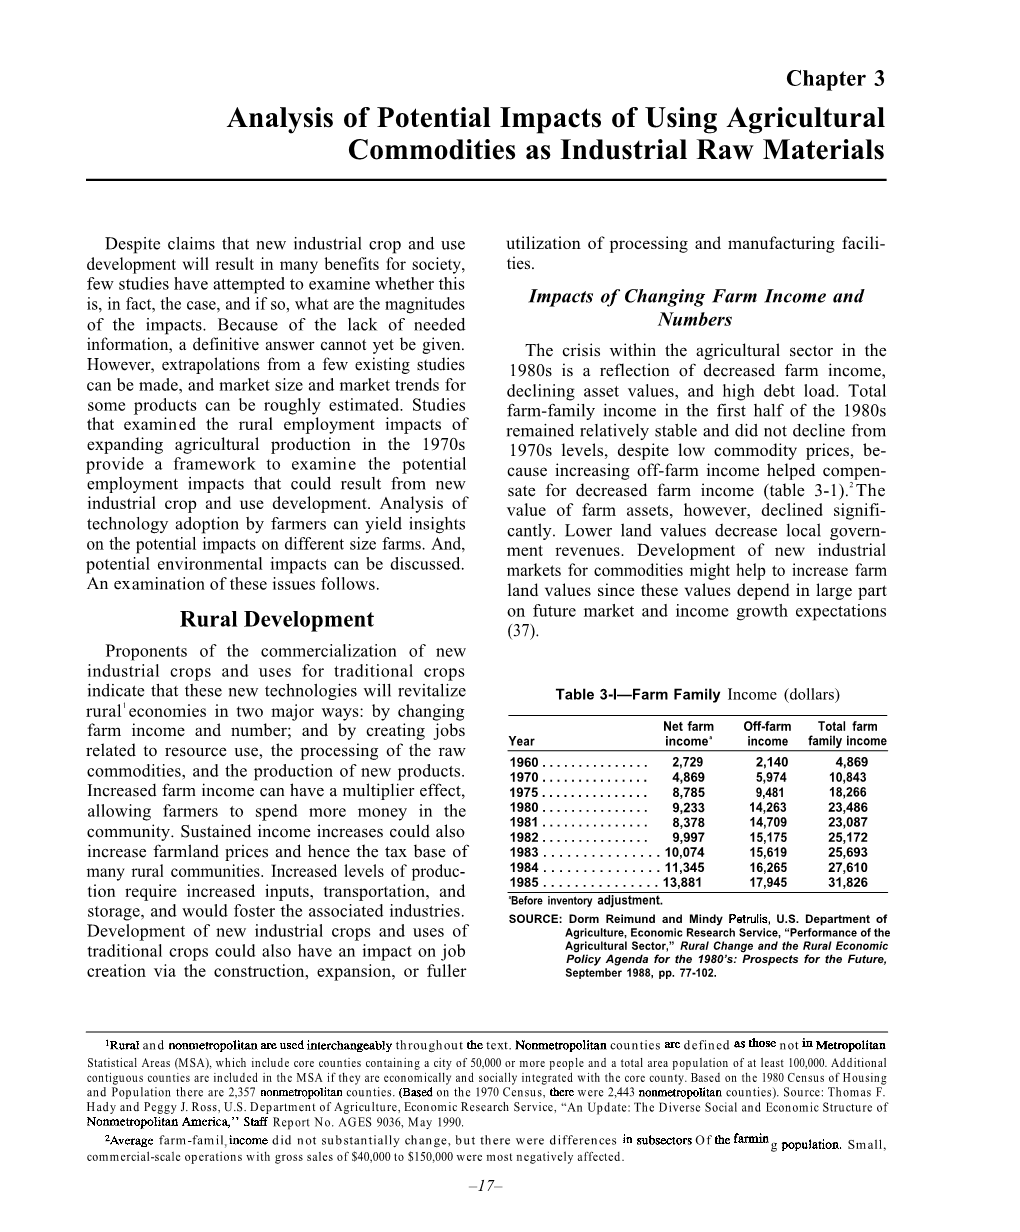 3: Analysis of Potential Impacts of Using Agricultural Commodities As Industrial Raw Materials